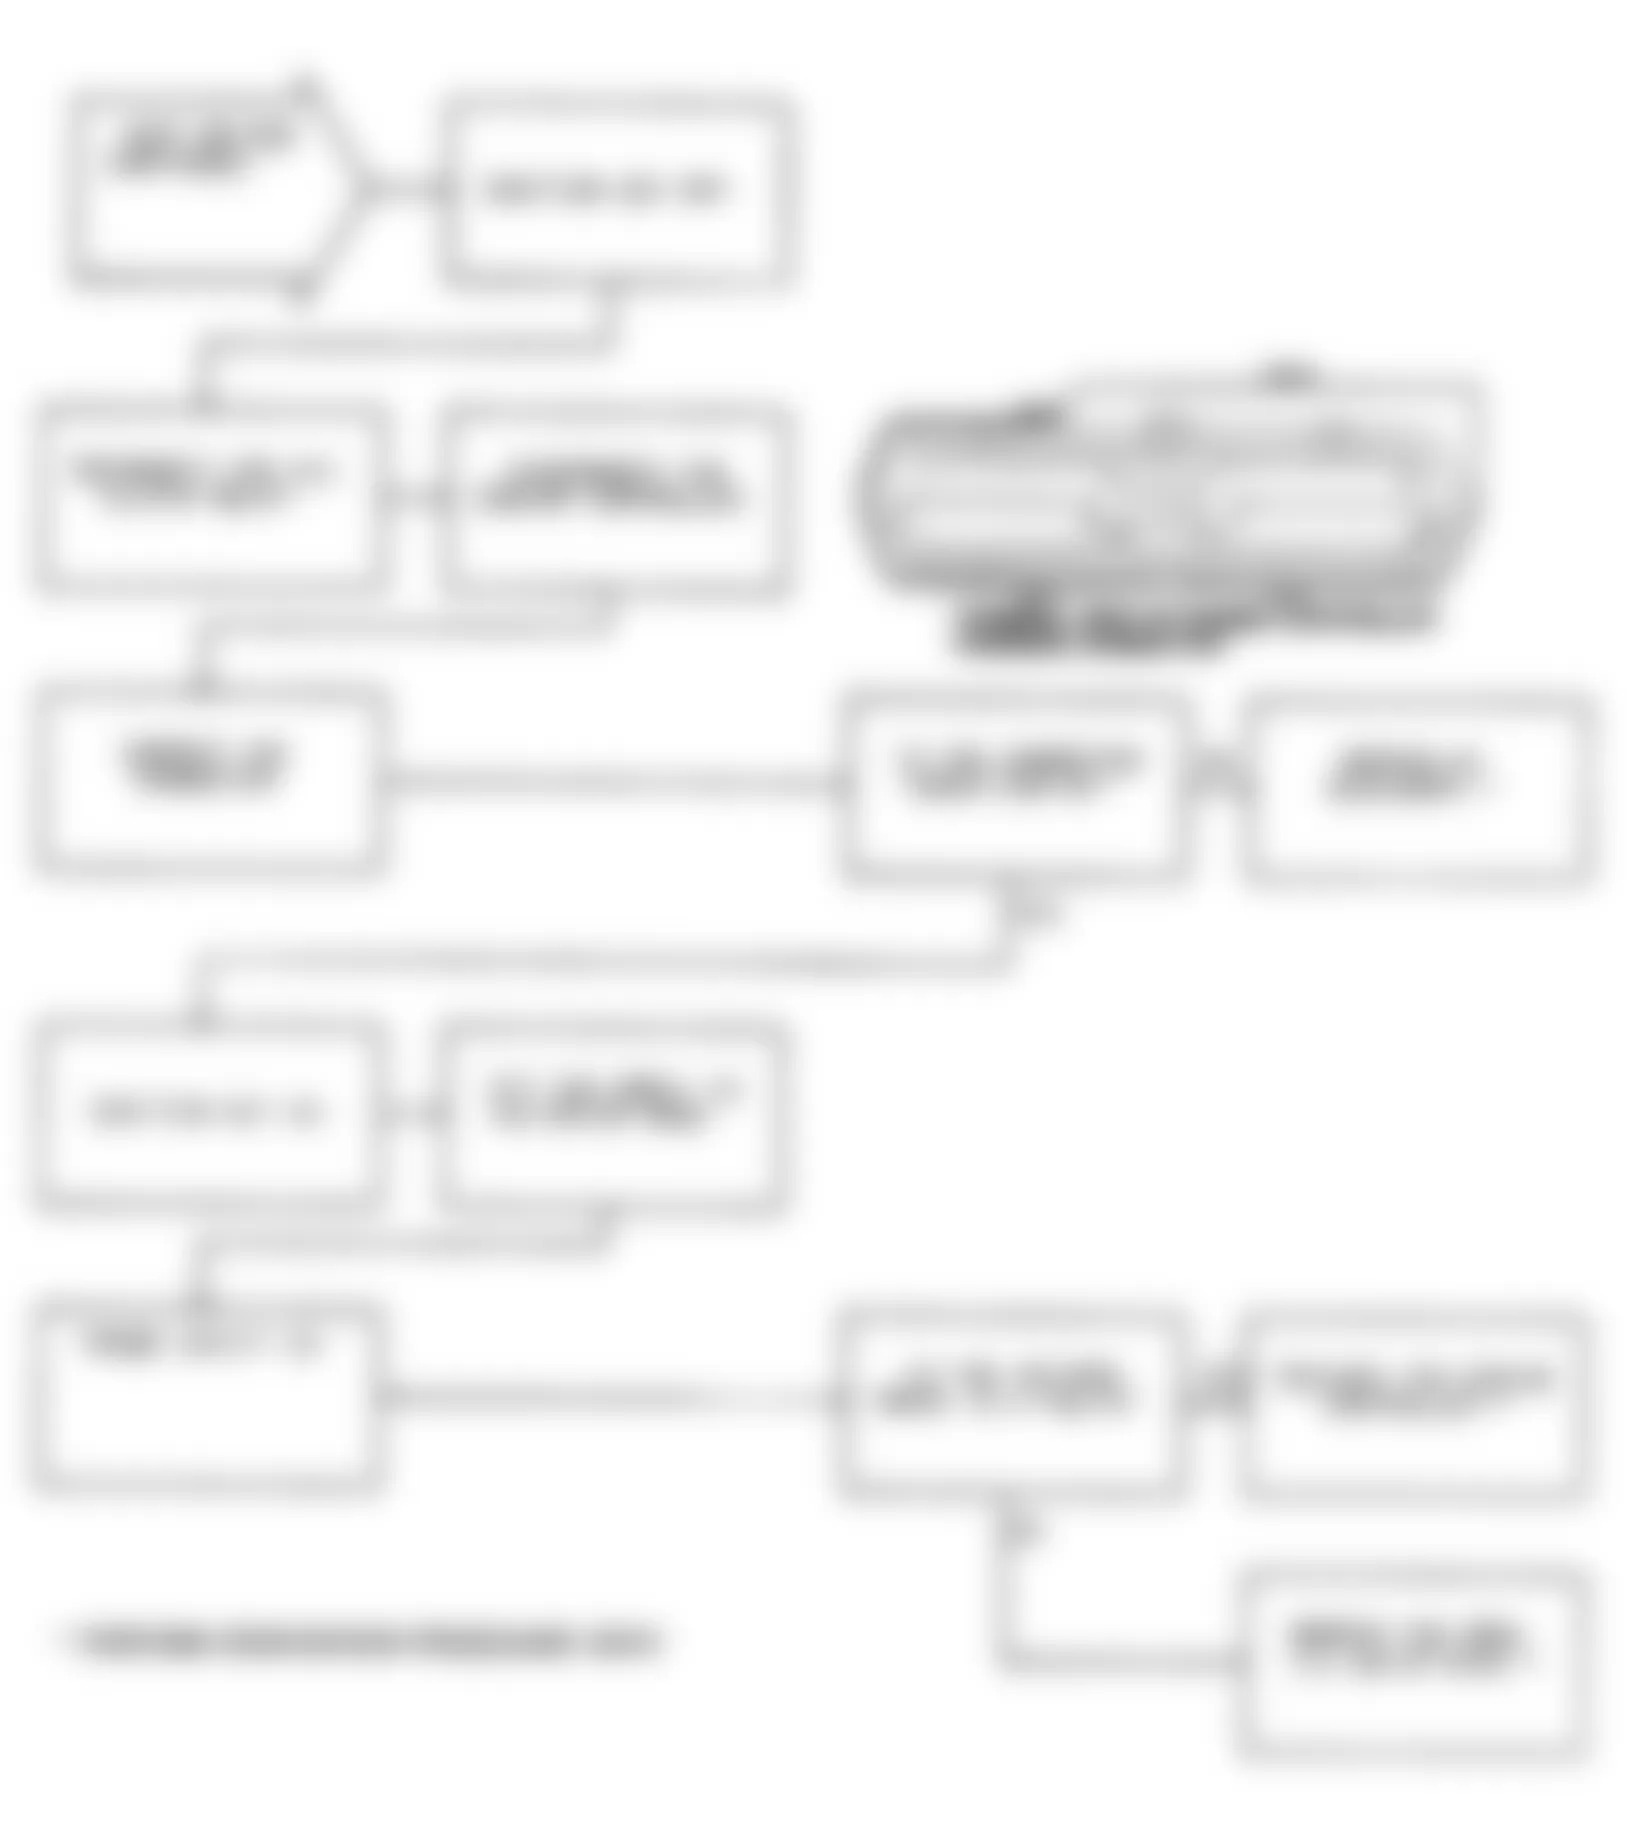 Chrysler New Yorker Fifth Avenue 1991 - Component Locations -  Test DR-25A Code 33: Flowchart (2 of 2)